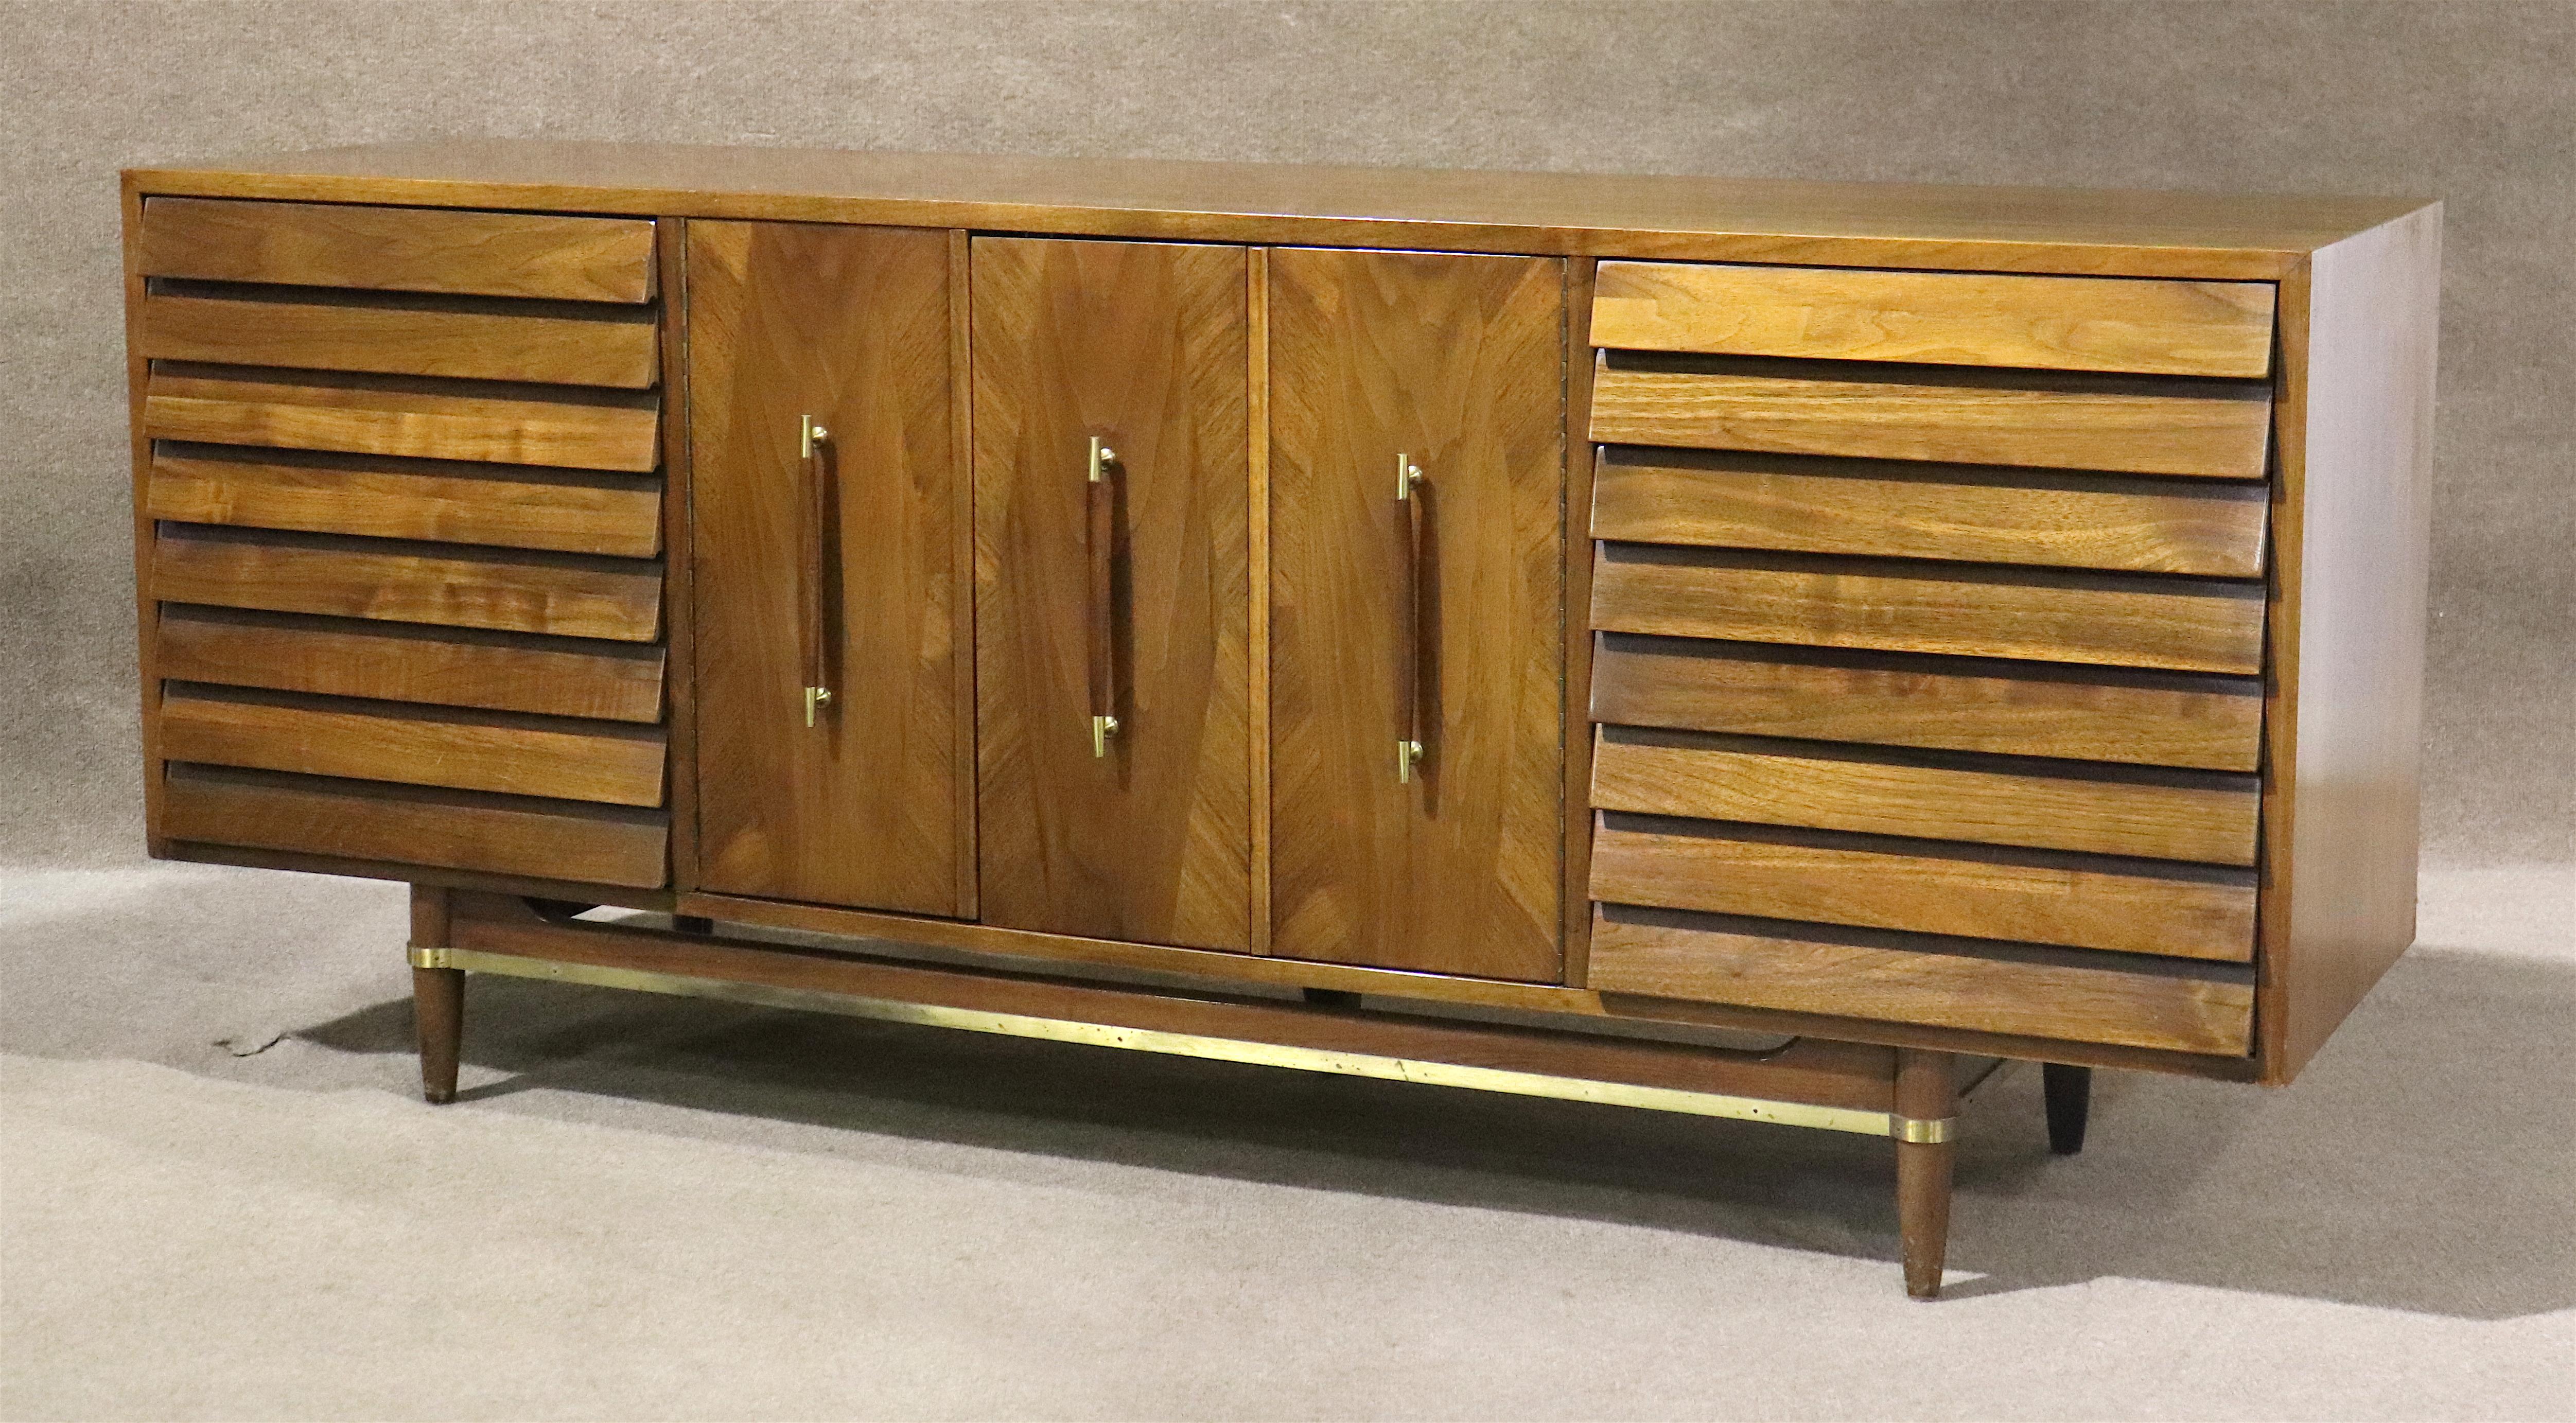 Merton Gershun designed dresser for his 'Dania' line with American of Martinsville. Beautiful walnut wood grain throughout with inlaid flourishes around the sculpted handles. Louvered front drawers and brass trimming accents the vintage modern